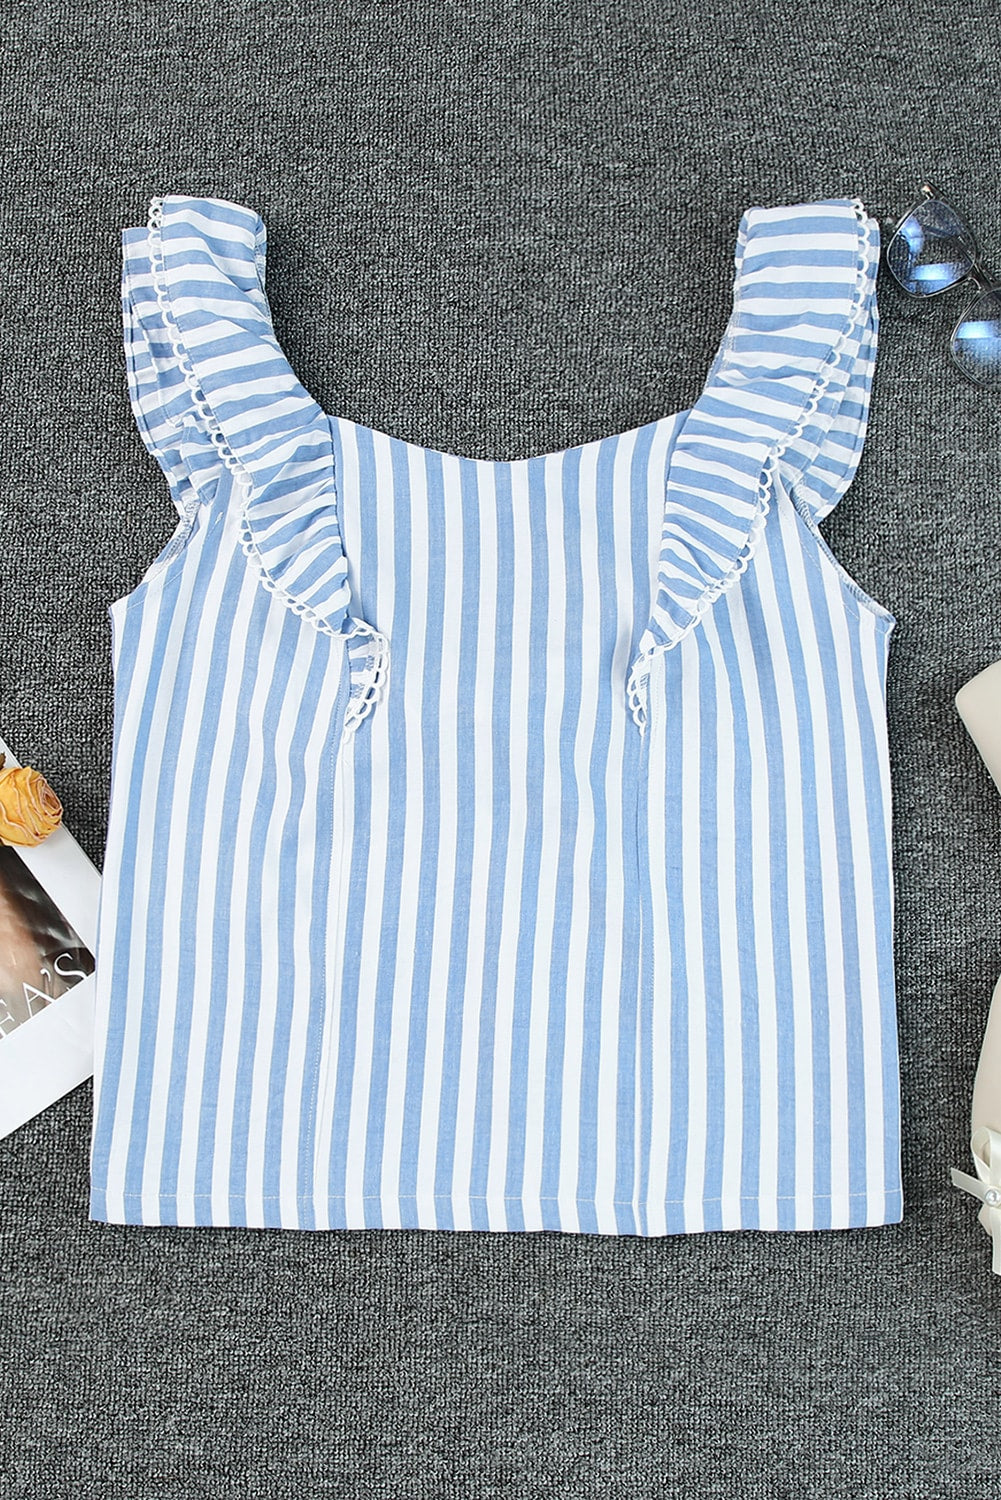 Bow in the Back Blue Striped Tank